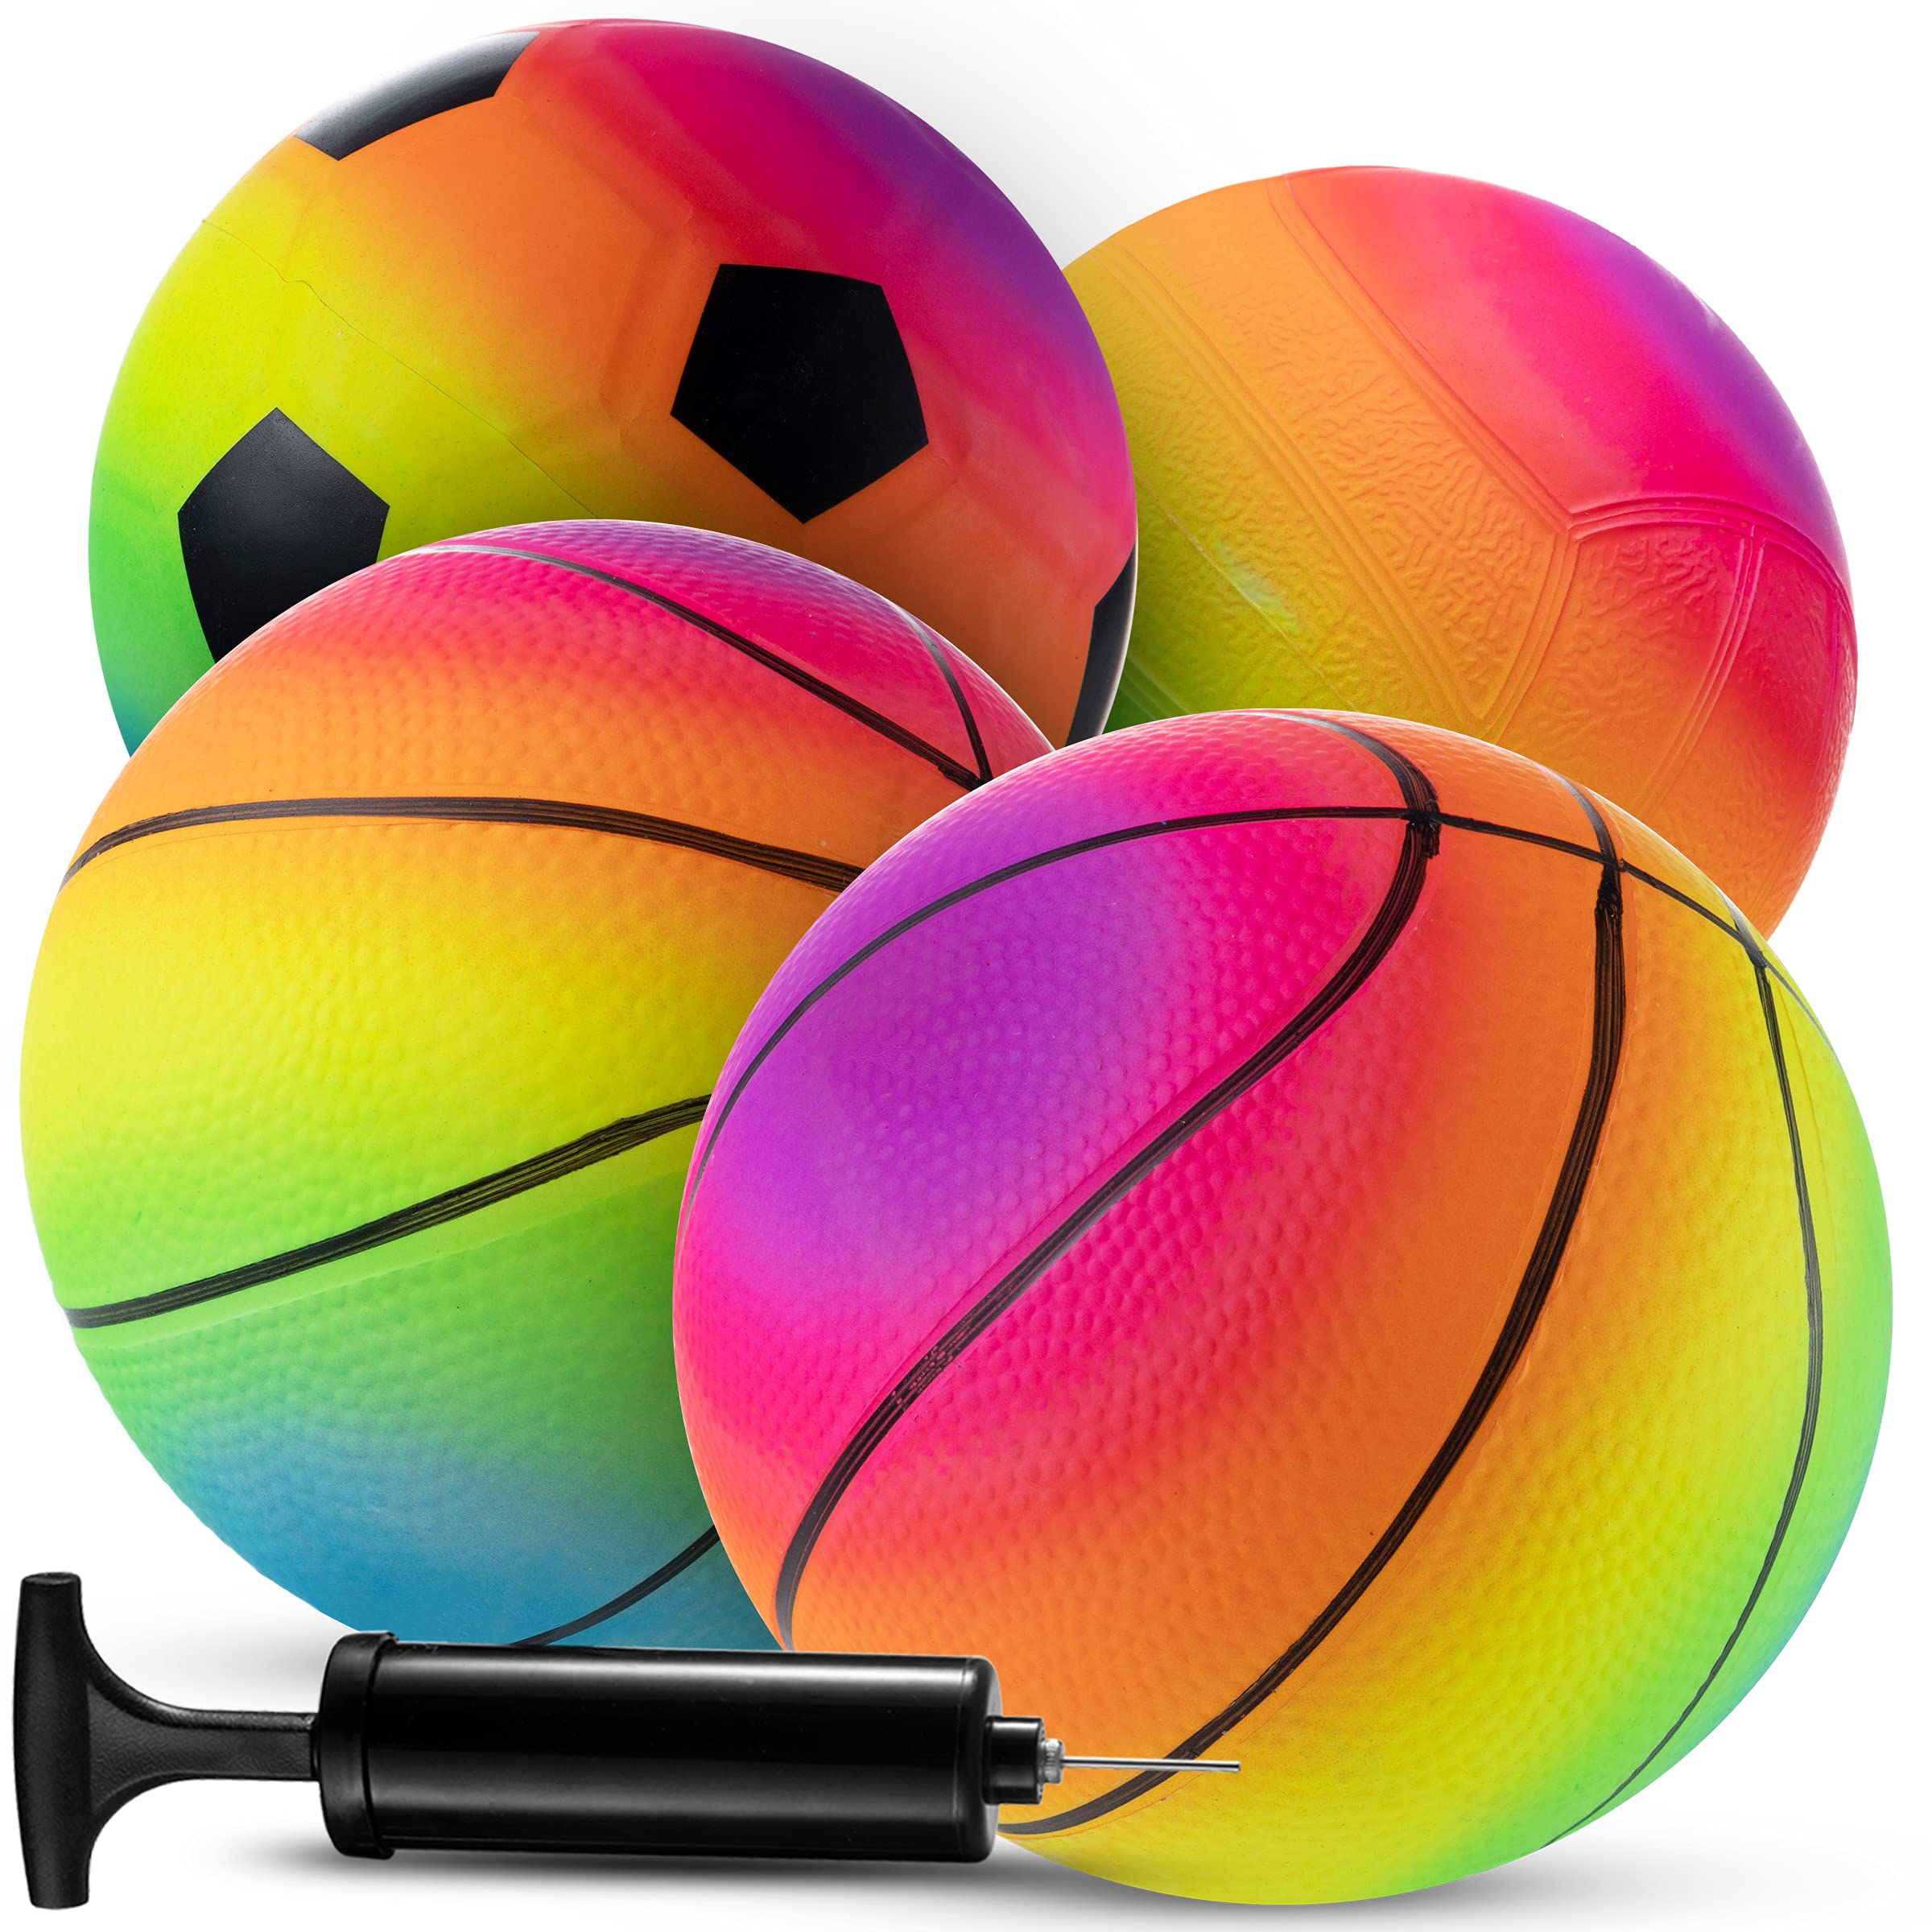 Mini Rainbow Sports Balls - 6 Inch (Pack of 4) Inflatable Vinyl Balls for Kids and Toddlers with Hand Air Pump, Neon Basketball, Soccer Ball, and Volleyball for Playground, Indoor and Outdoor Use